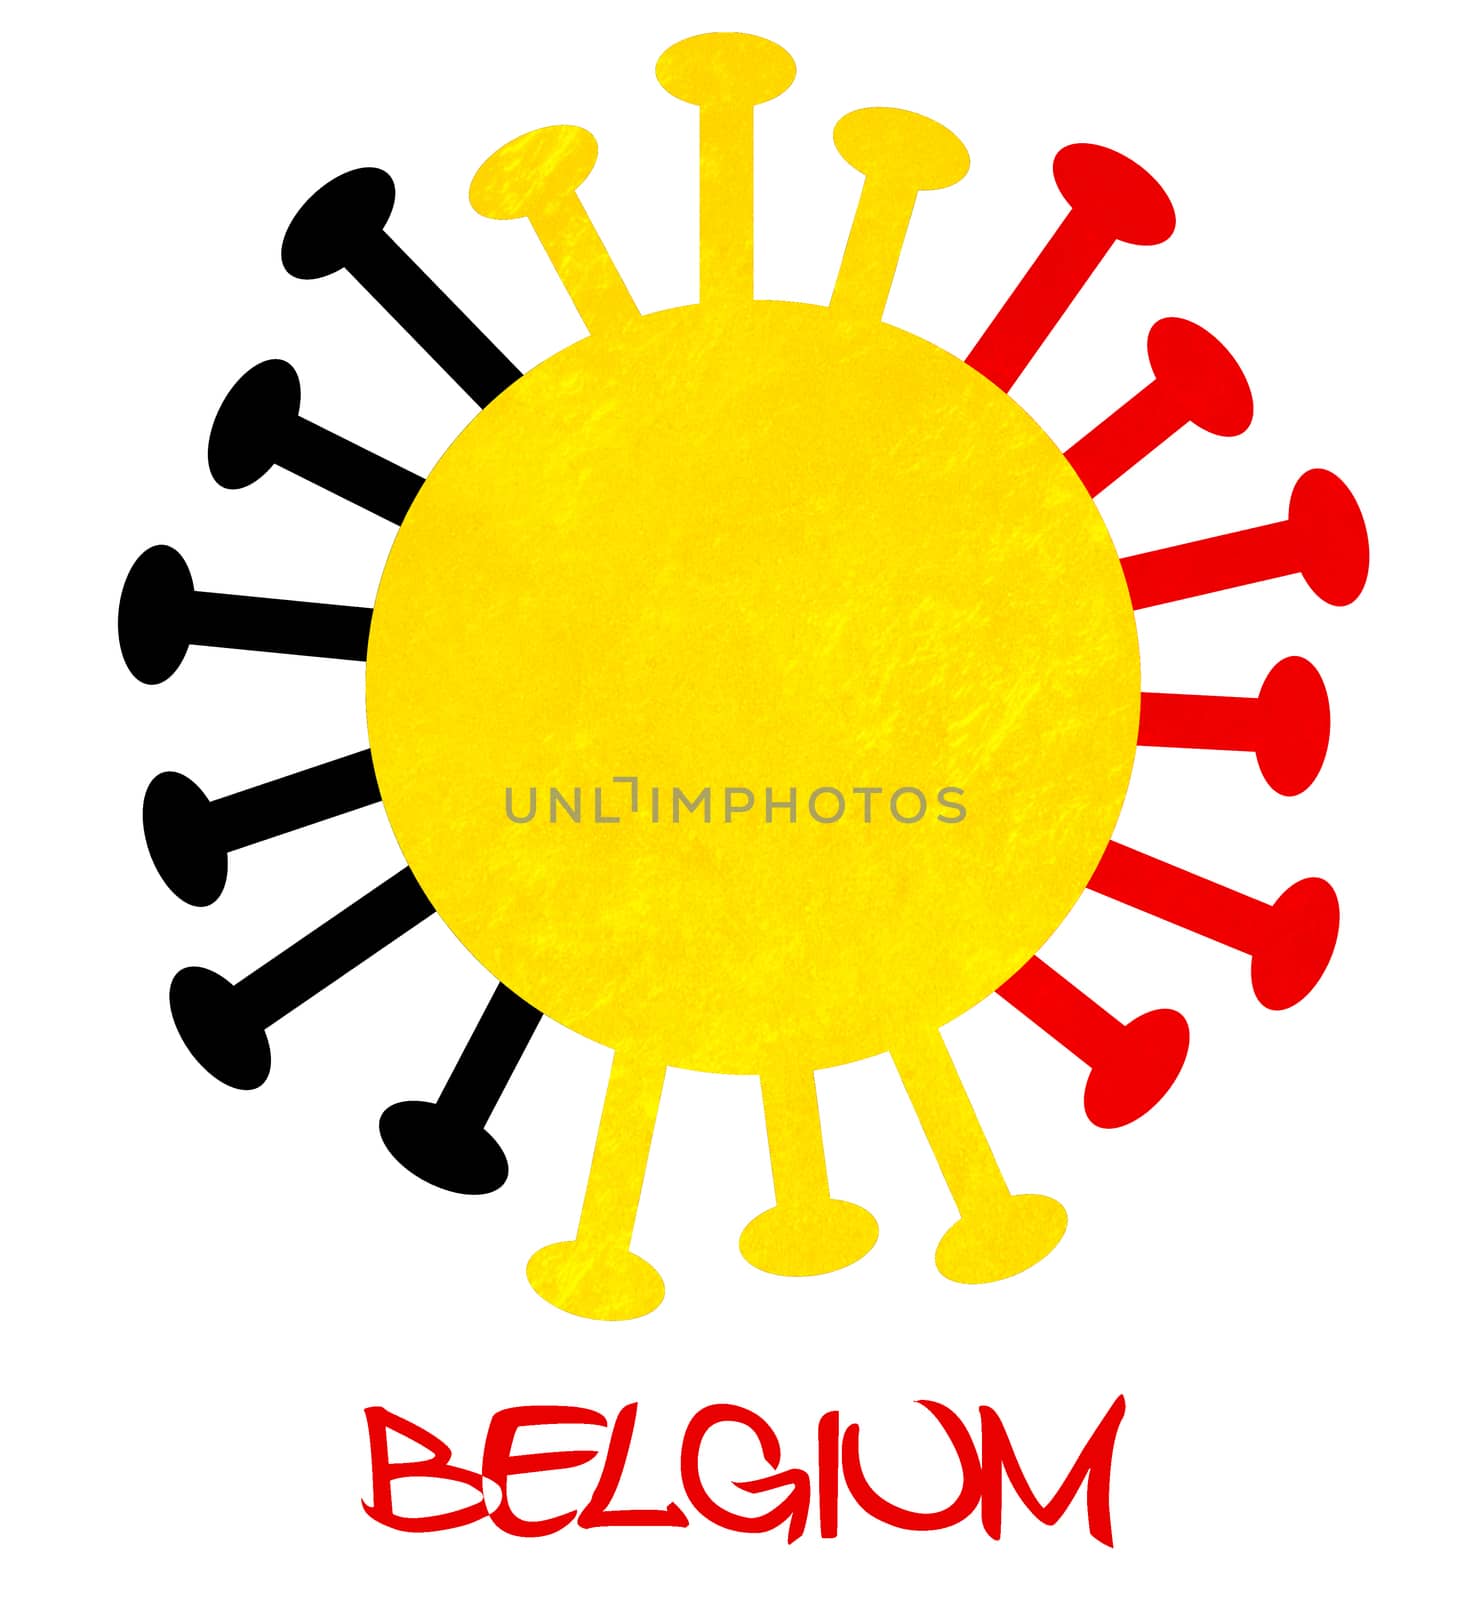 The Belgium national flag with corona virus or bacteria - Isolated on white